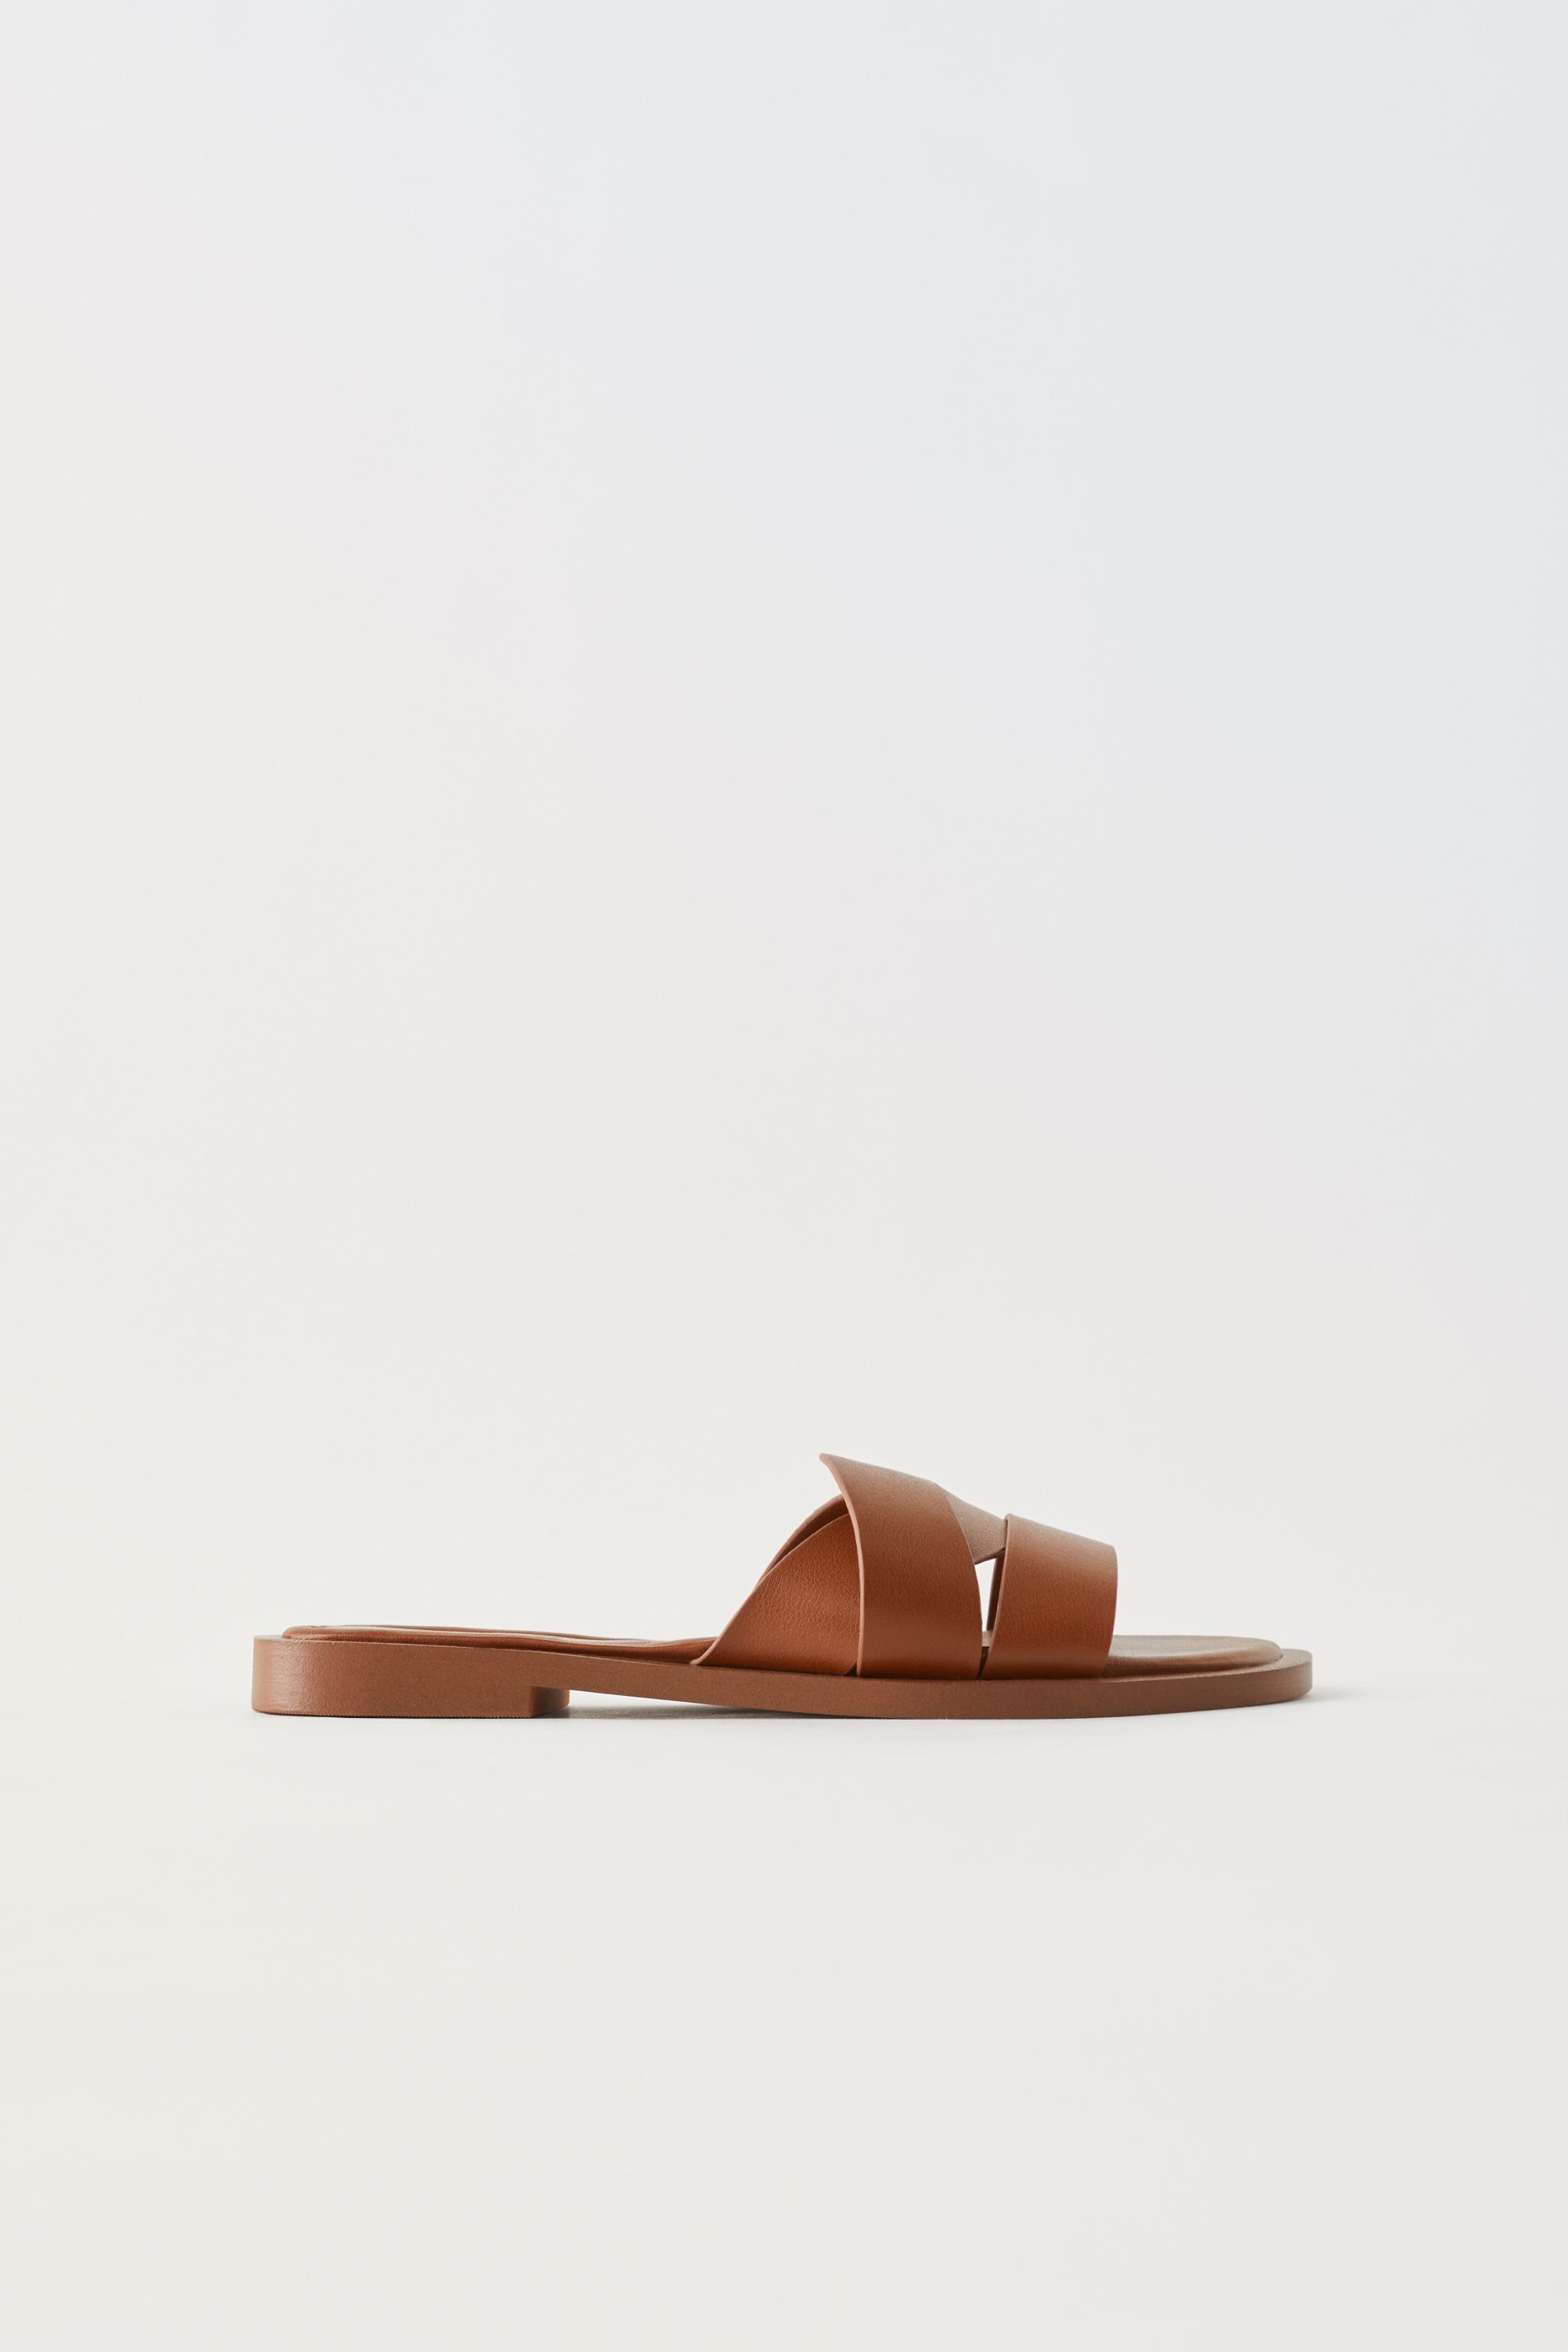 Zara Flat leather sandals with wide crisscross straps. Metal studs